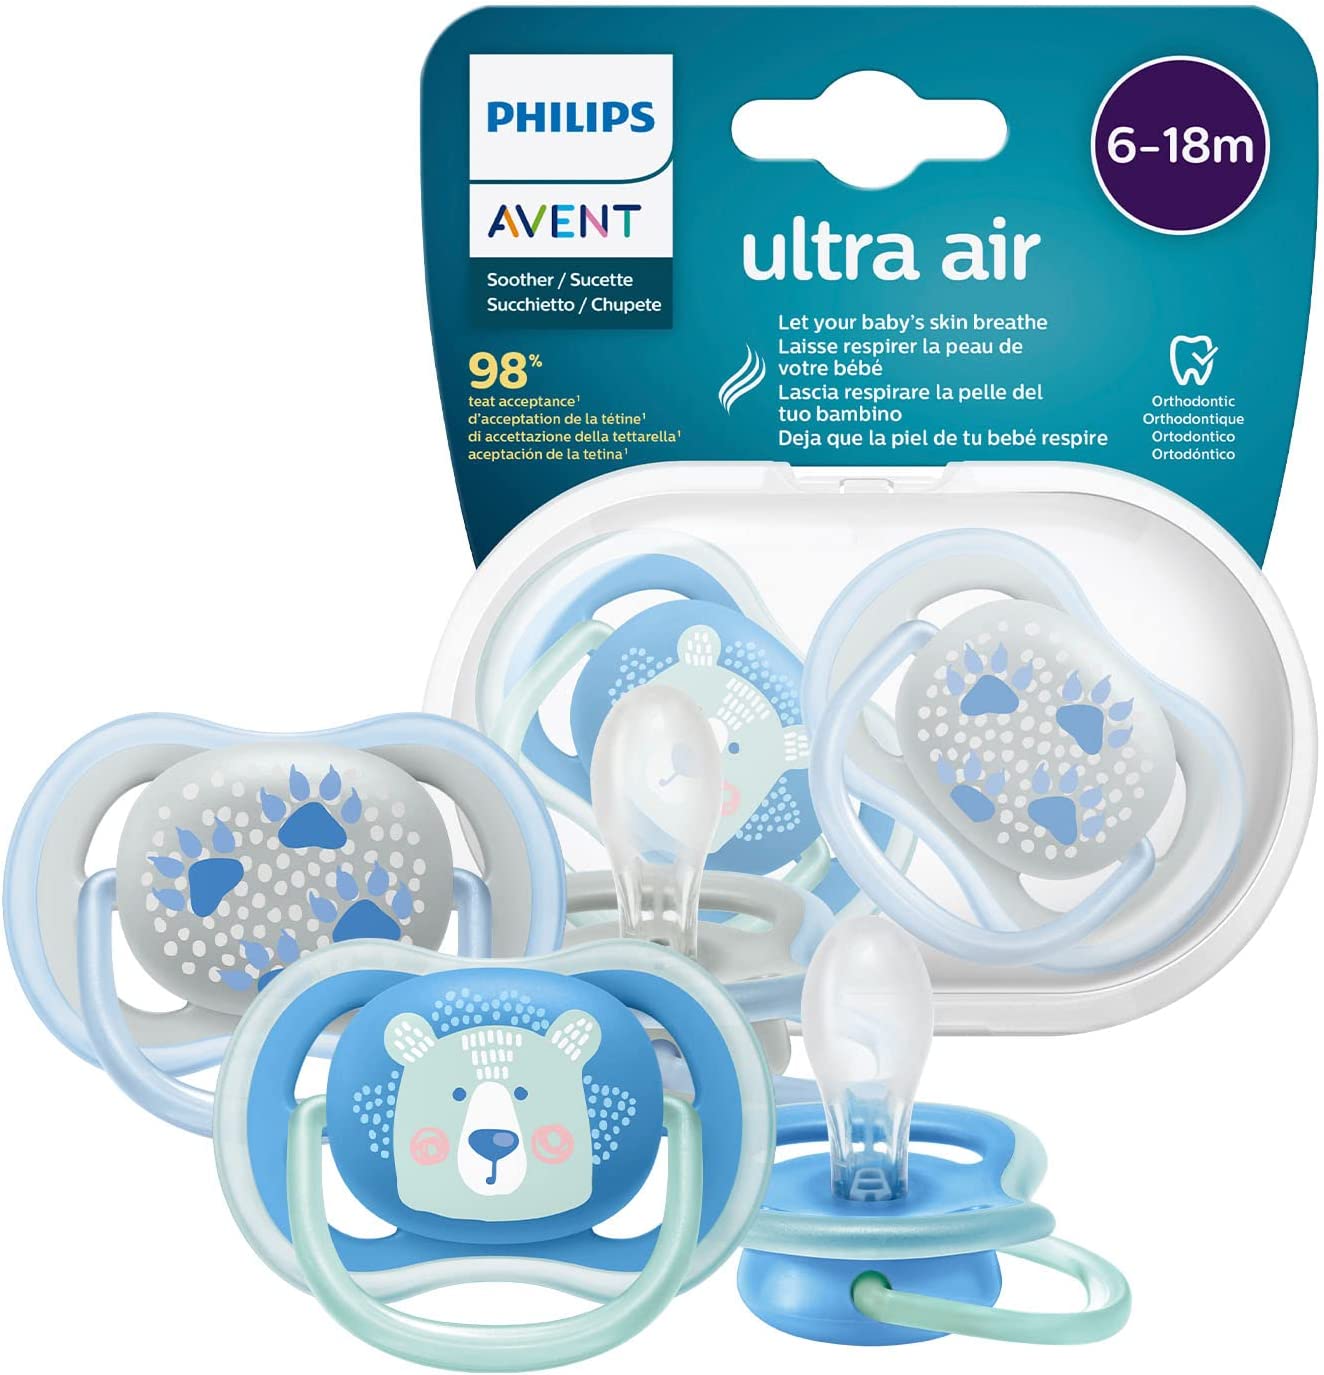 CHUPETE PHILIPS AVENT ULTRA AIR 0-6 MESES PACK 2